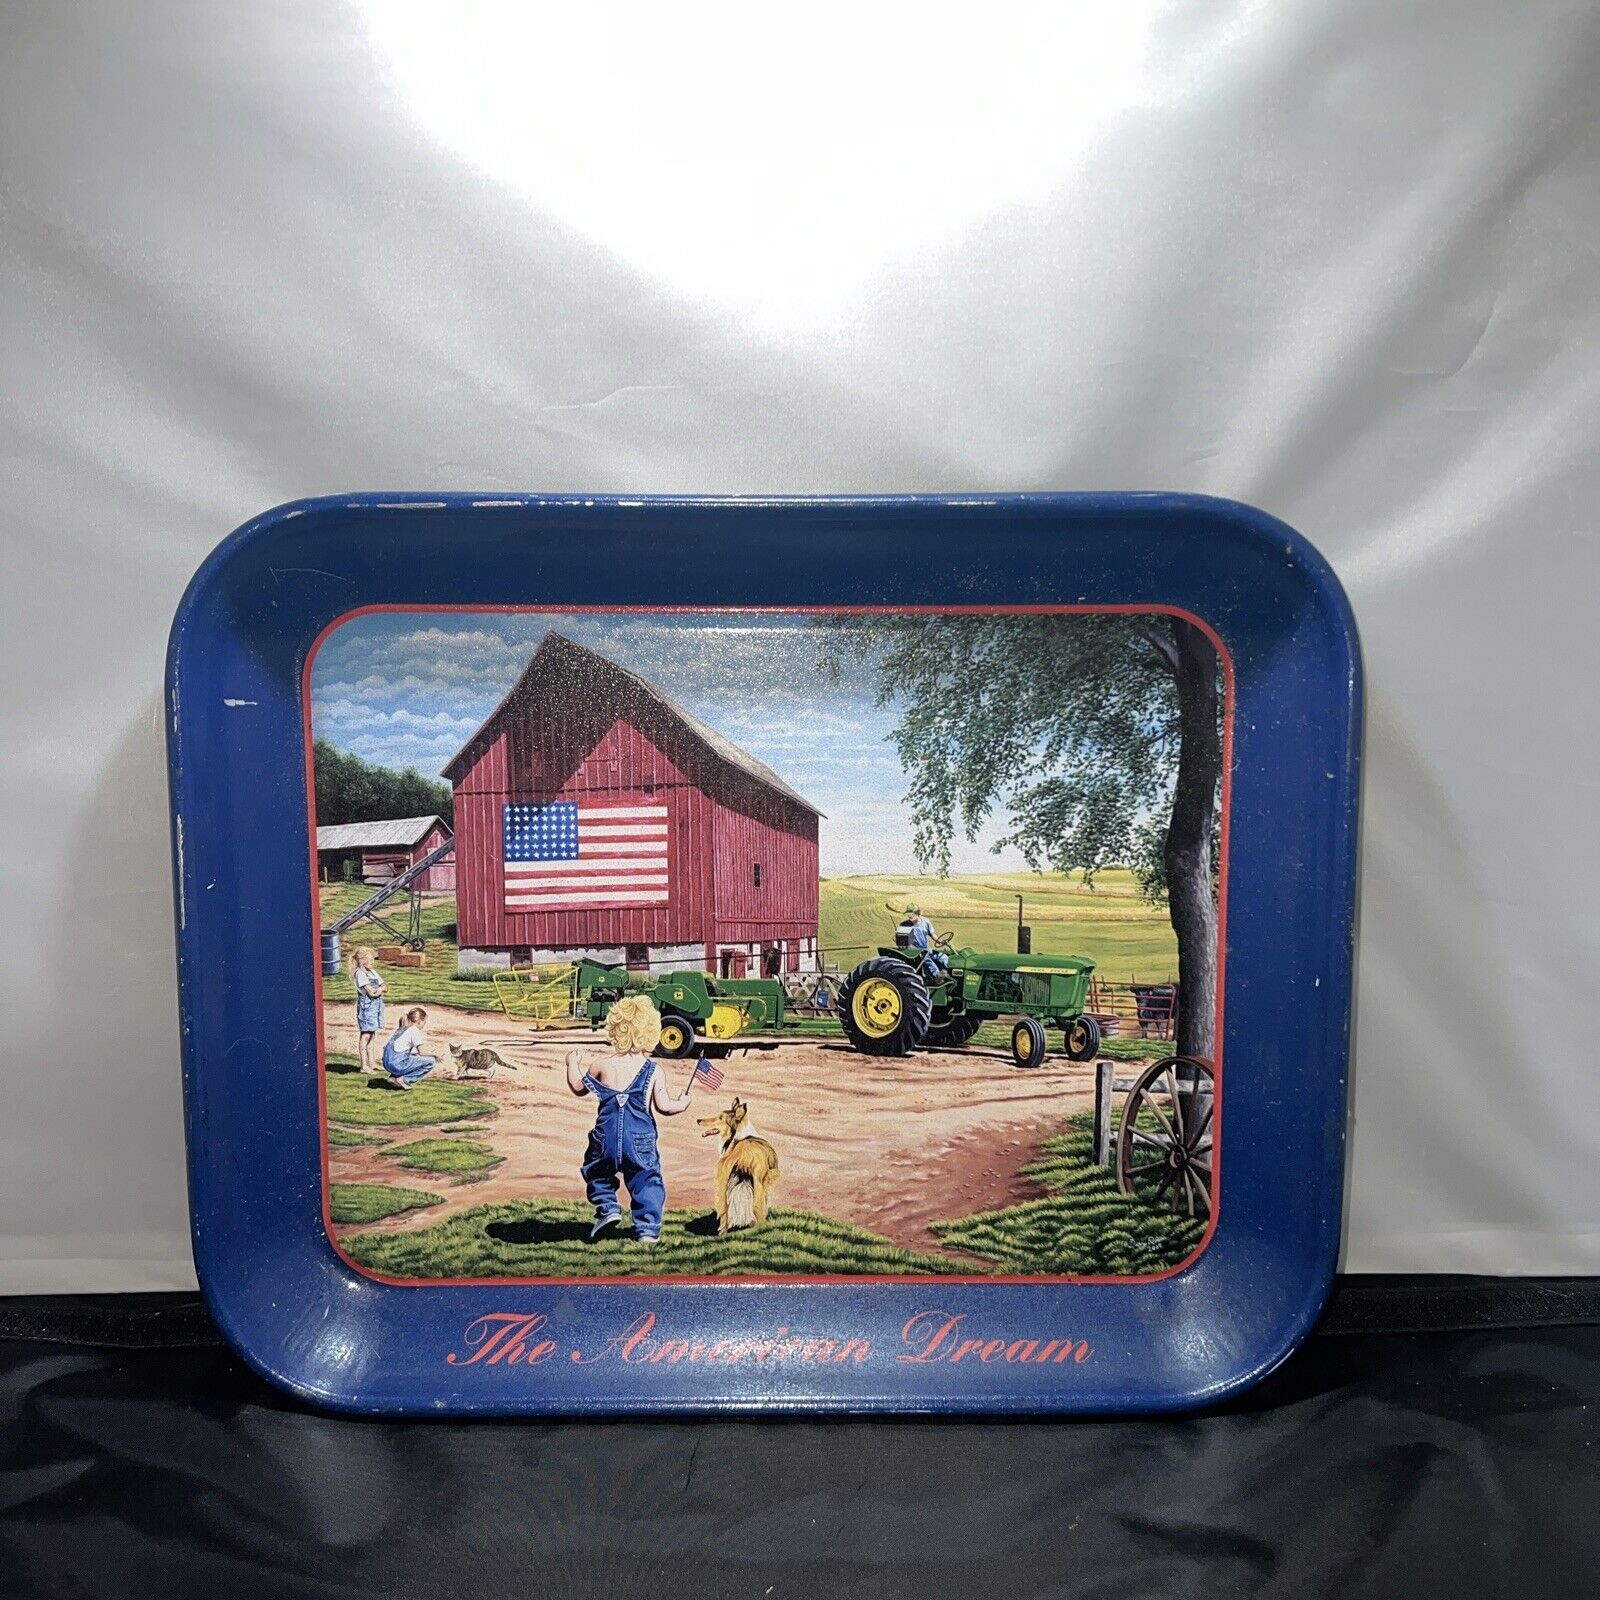 JOHN DEERE LICENSED TIN TRAY - THE AMERICAN DREAM FROM 2002 - MADE IN CHINA